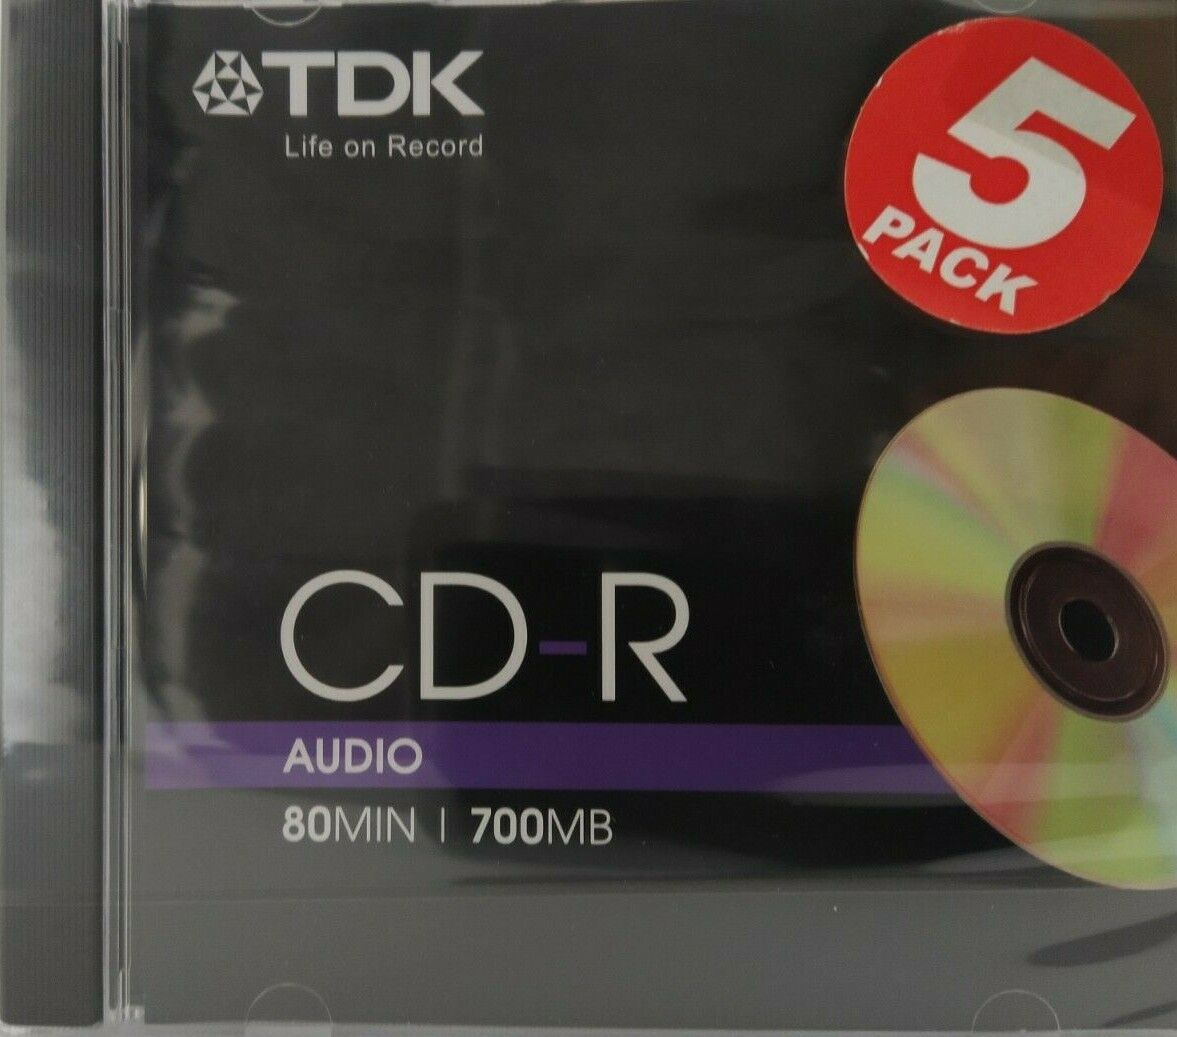 TDK CD-R80 – 5 Pack Audio Music Recordable Blank 80 Mins CD-R Discs NEW & SEALED